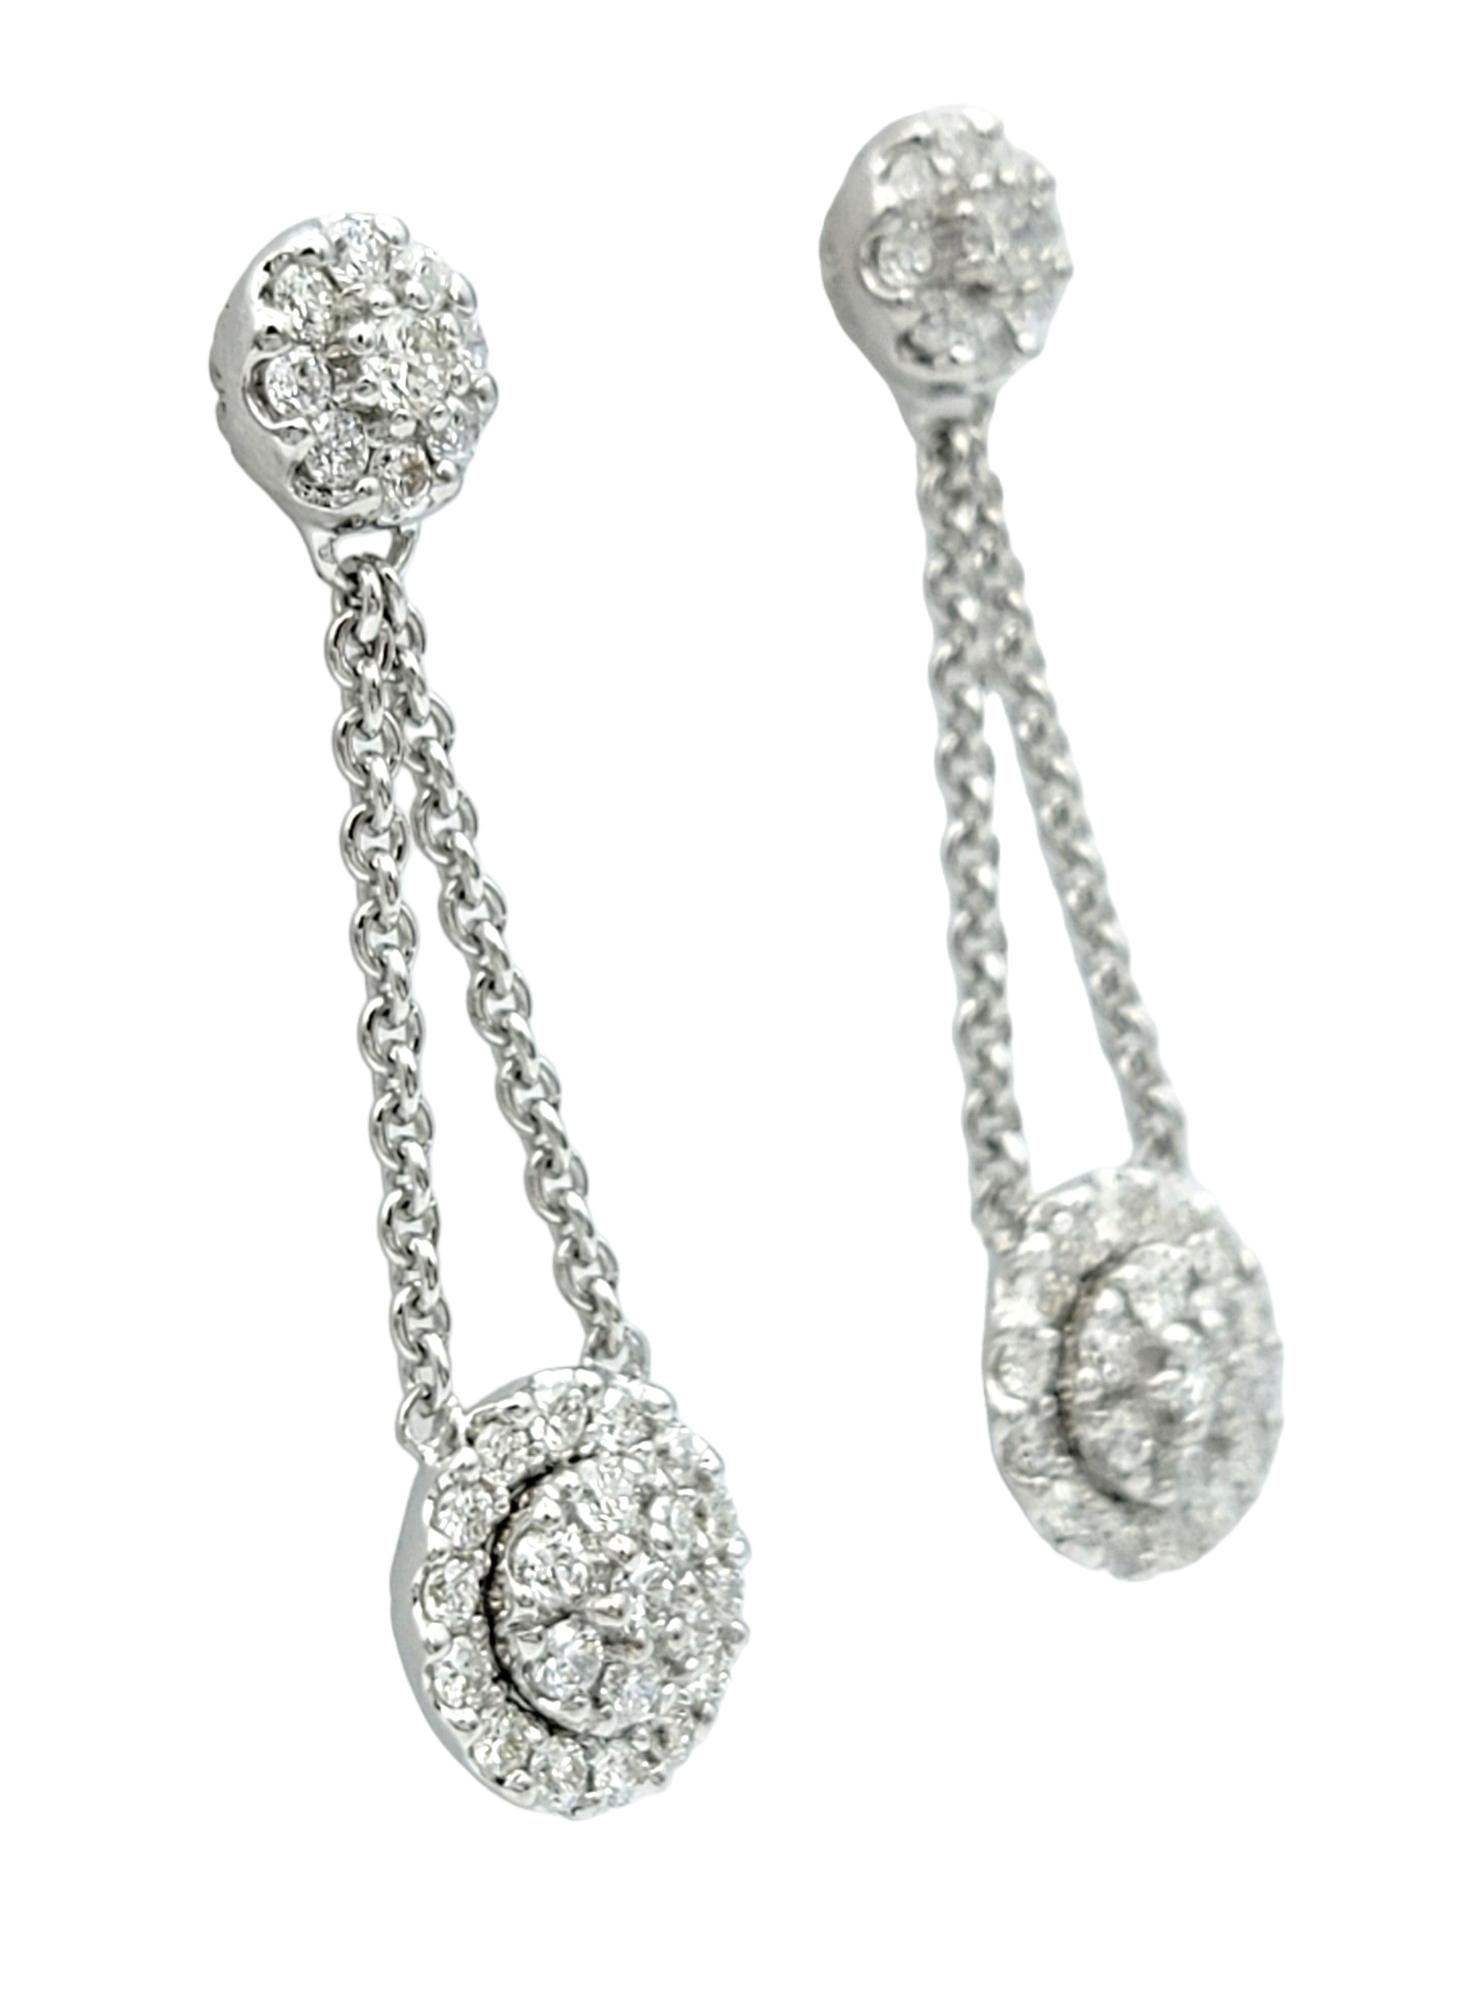 These gorgeous diamond earrings, set in 18 karat white gold, are a timeless expression of elegance and sophistication. At the center of each earring lies a dazzling diamond cluster, exuding brilliance and capturing the light with every movement.